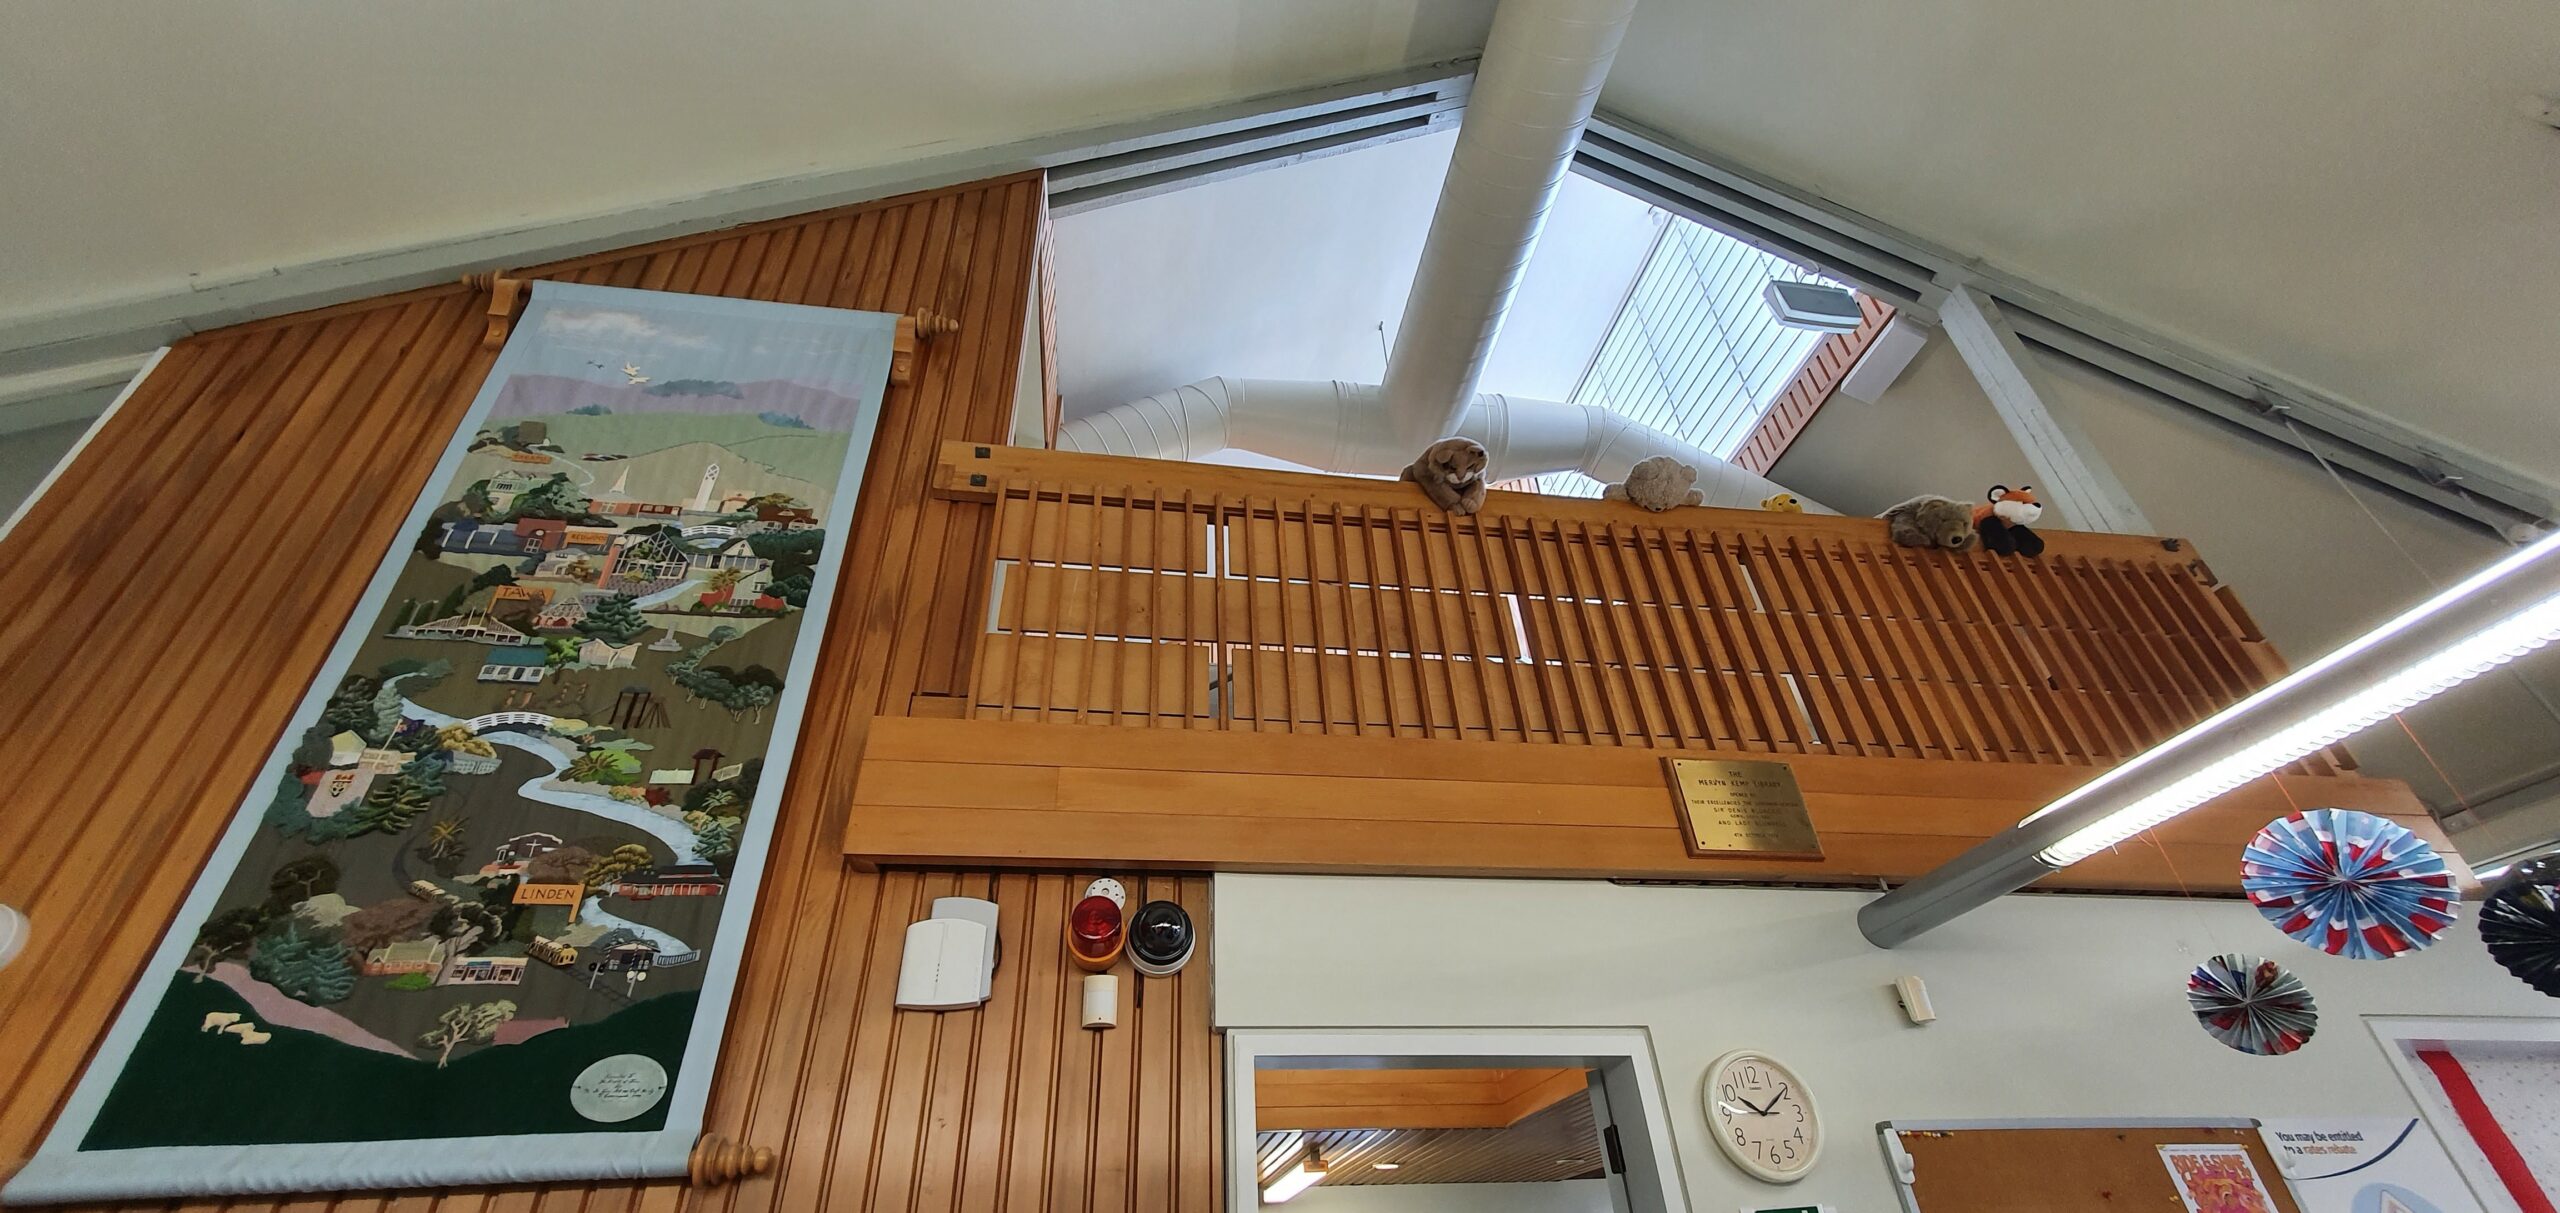 Natural wood balcony with stuffed aniimals liiking down, a skylight above, and long tapestry hanging to the left.